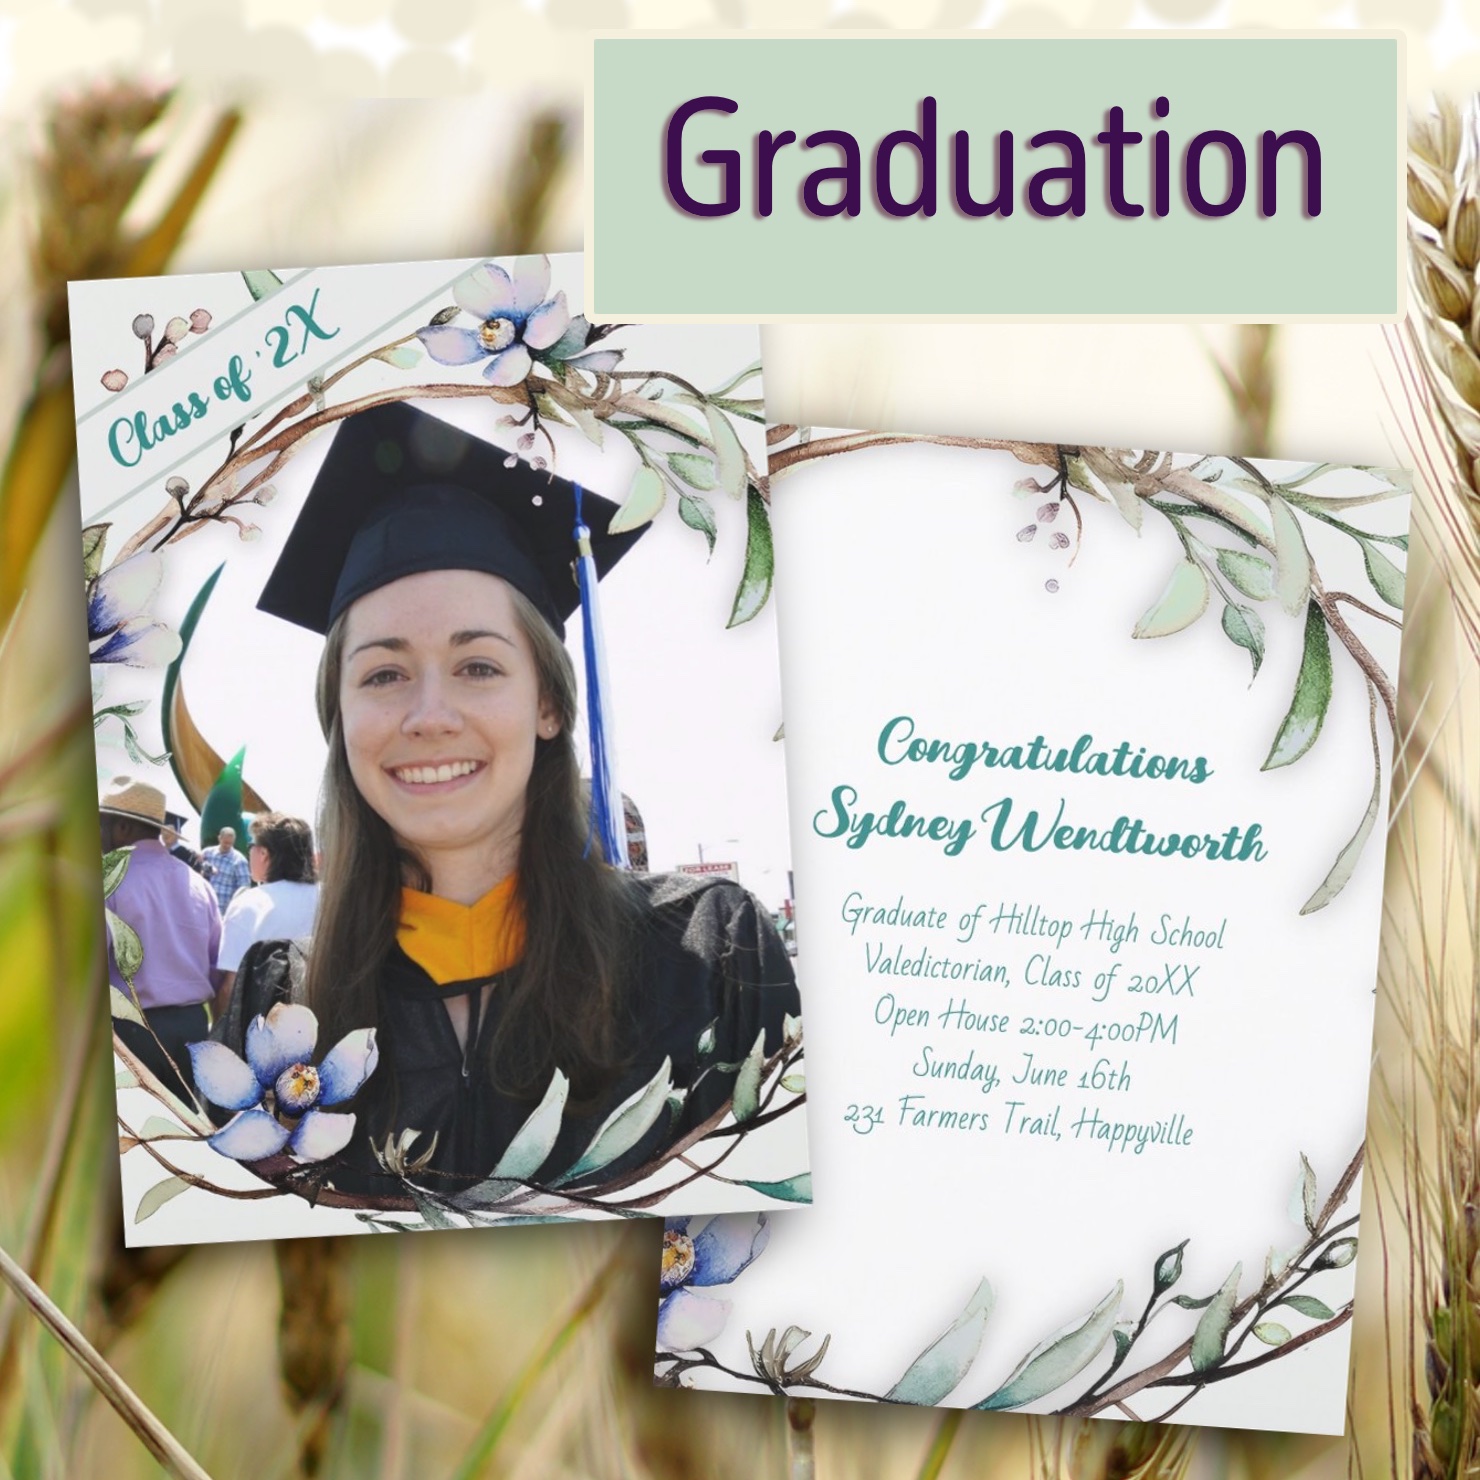 Graduation announcements and party invitations